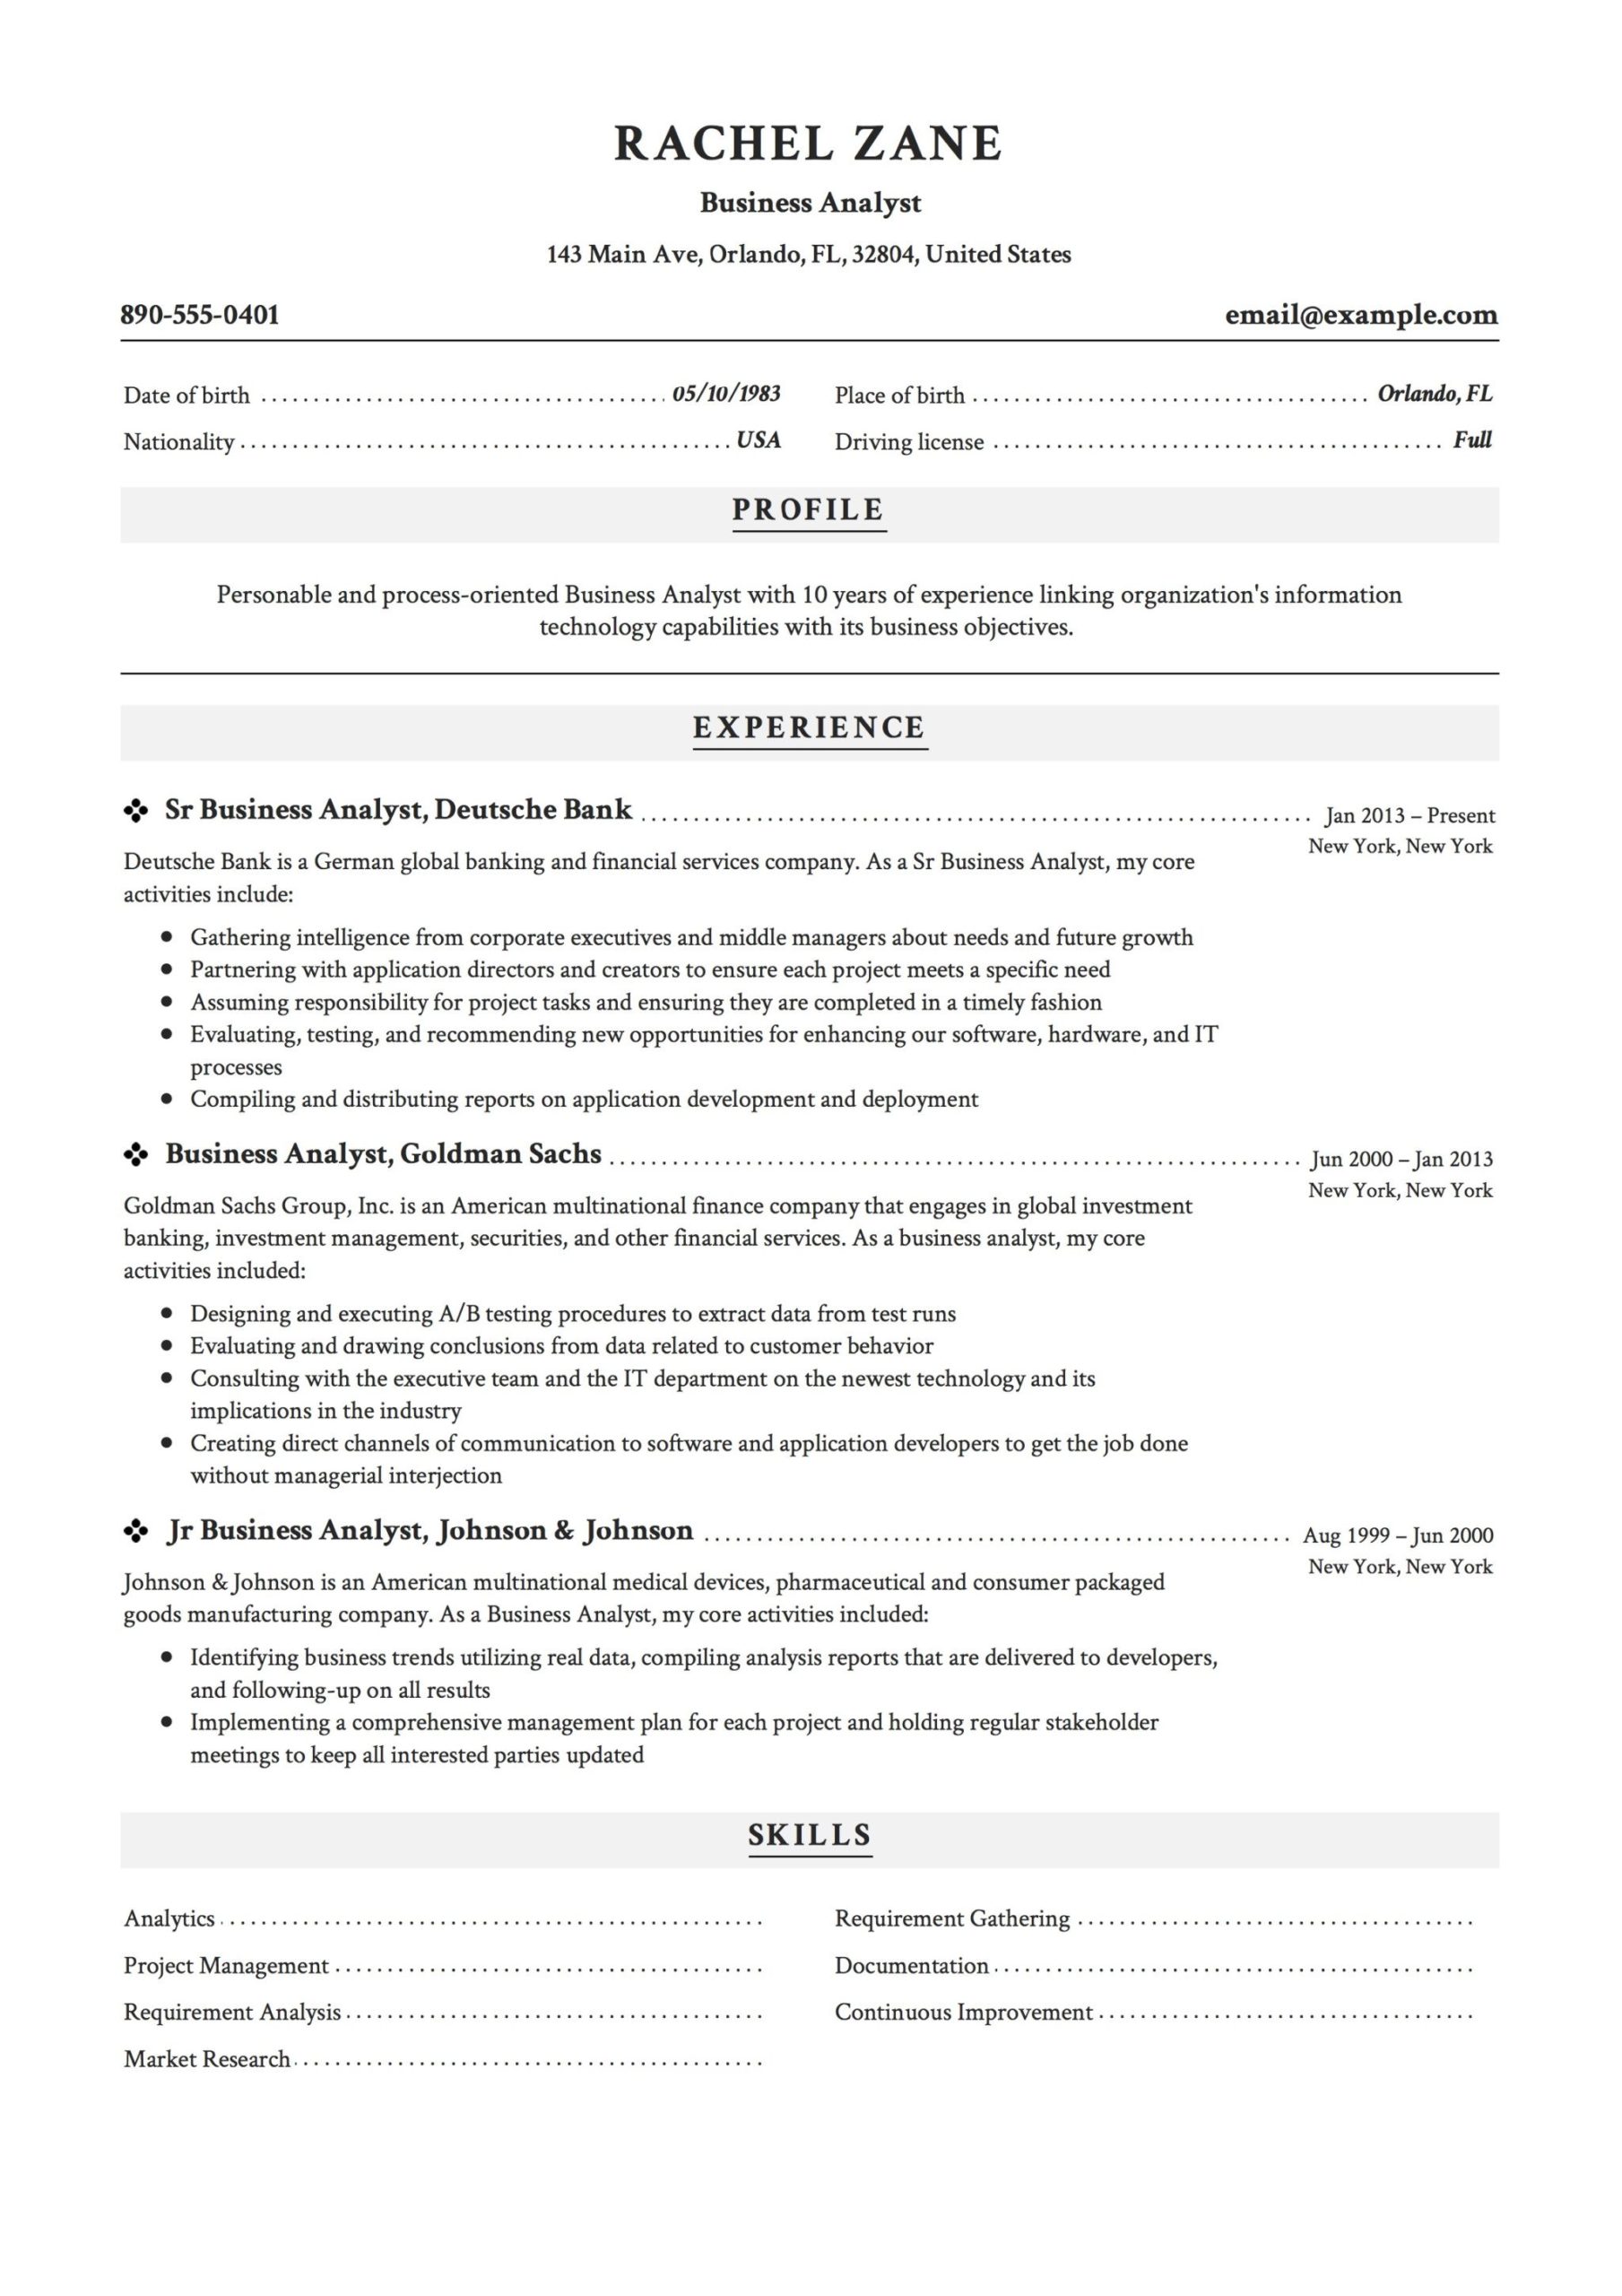 Sample Resume Of Corporate Actions Analyst Business Analyst Resume Examples & Writing Guide 2022